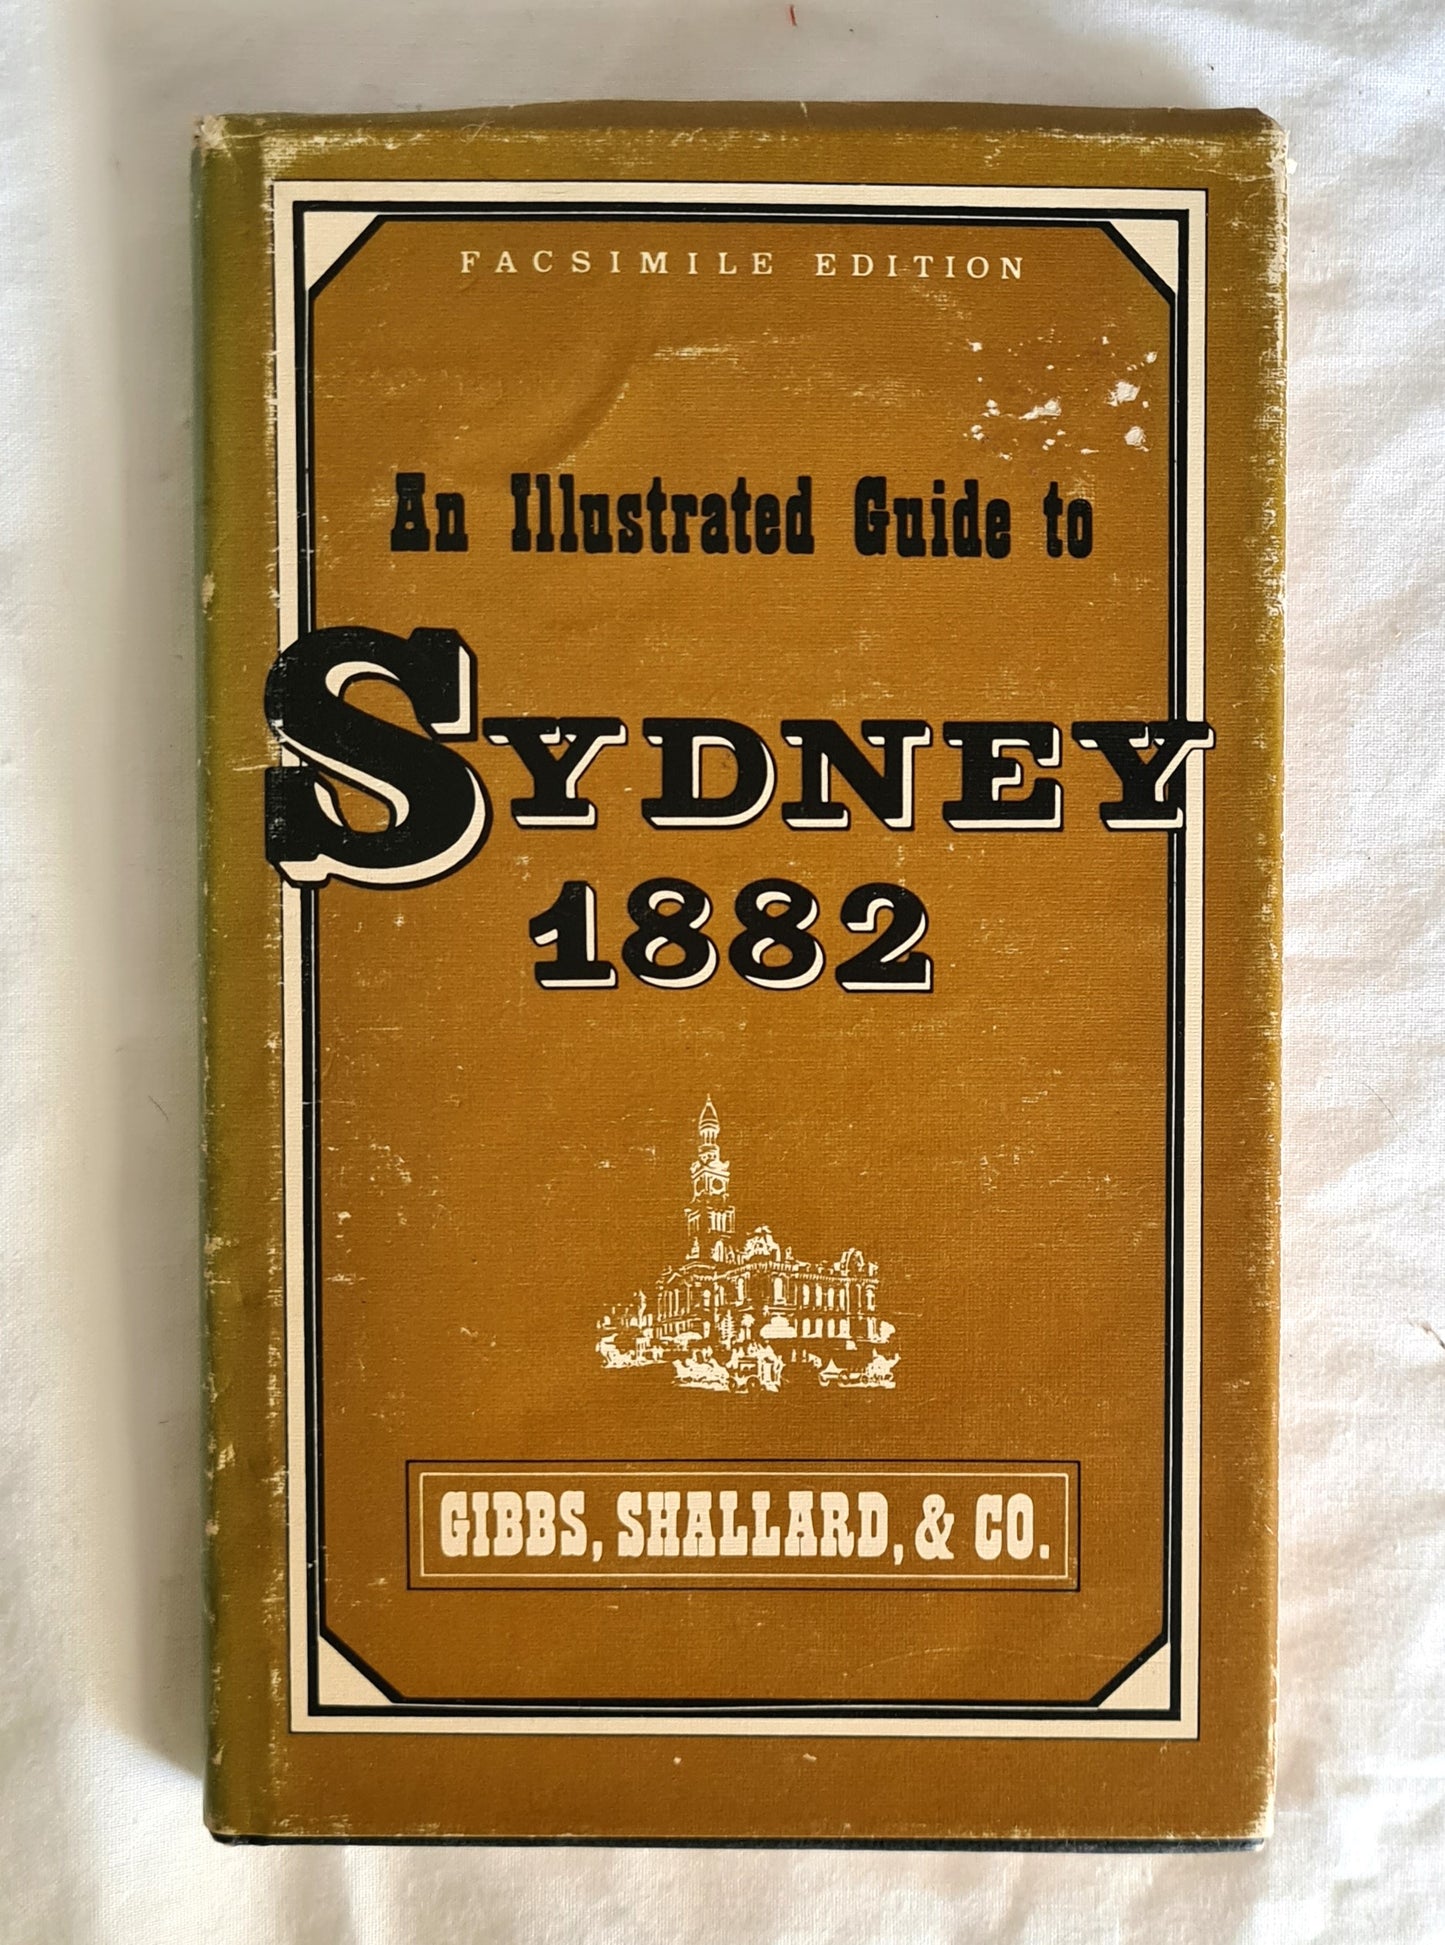 An Illustrated Guide to Sydney and its Suburbs 1882,  And to Favourite Places of Resort  by Gibbs, Shallard & Co.  Ferguson no. 9896